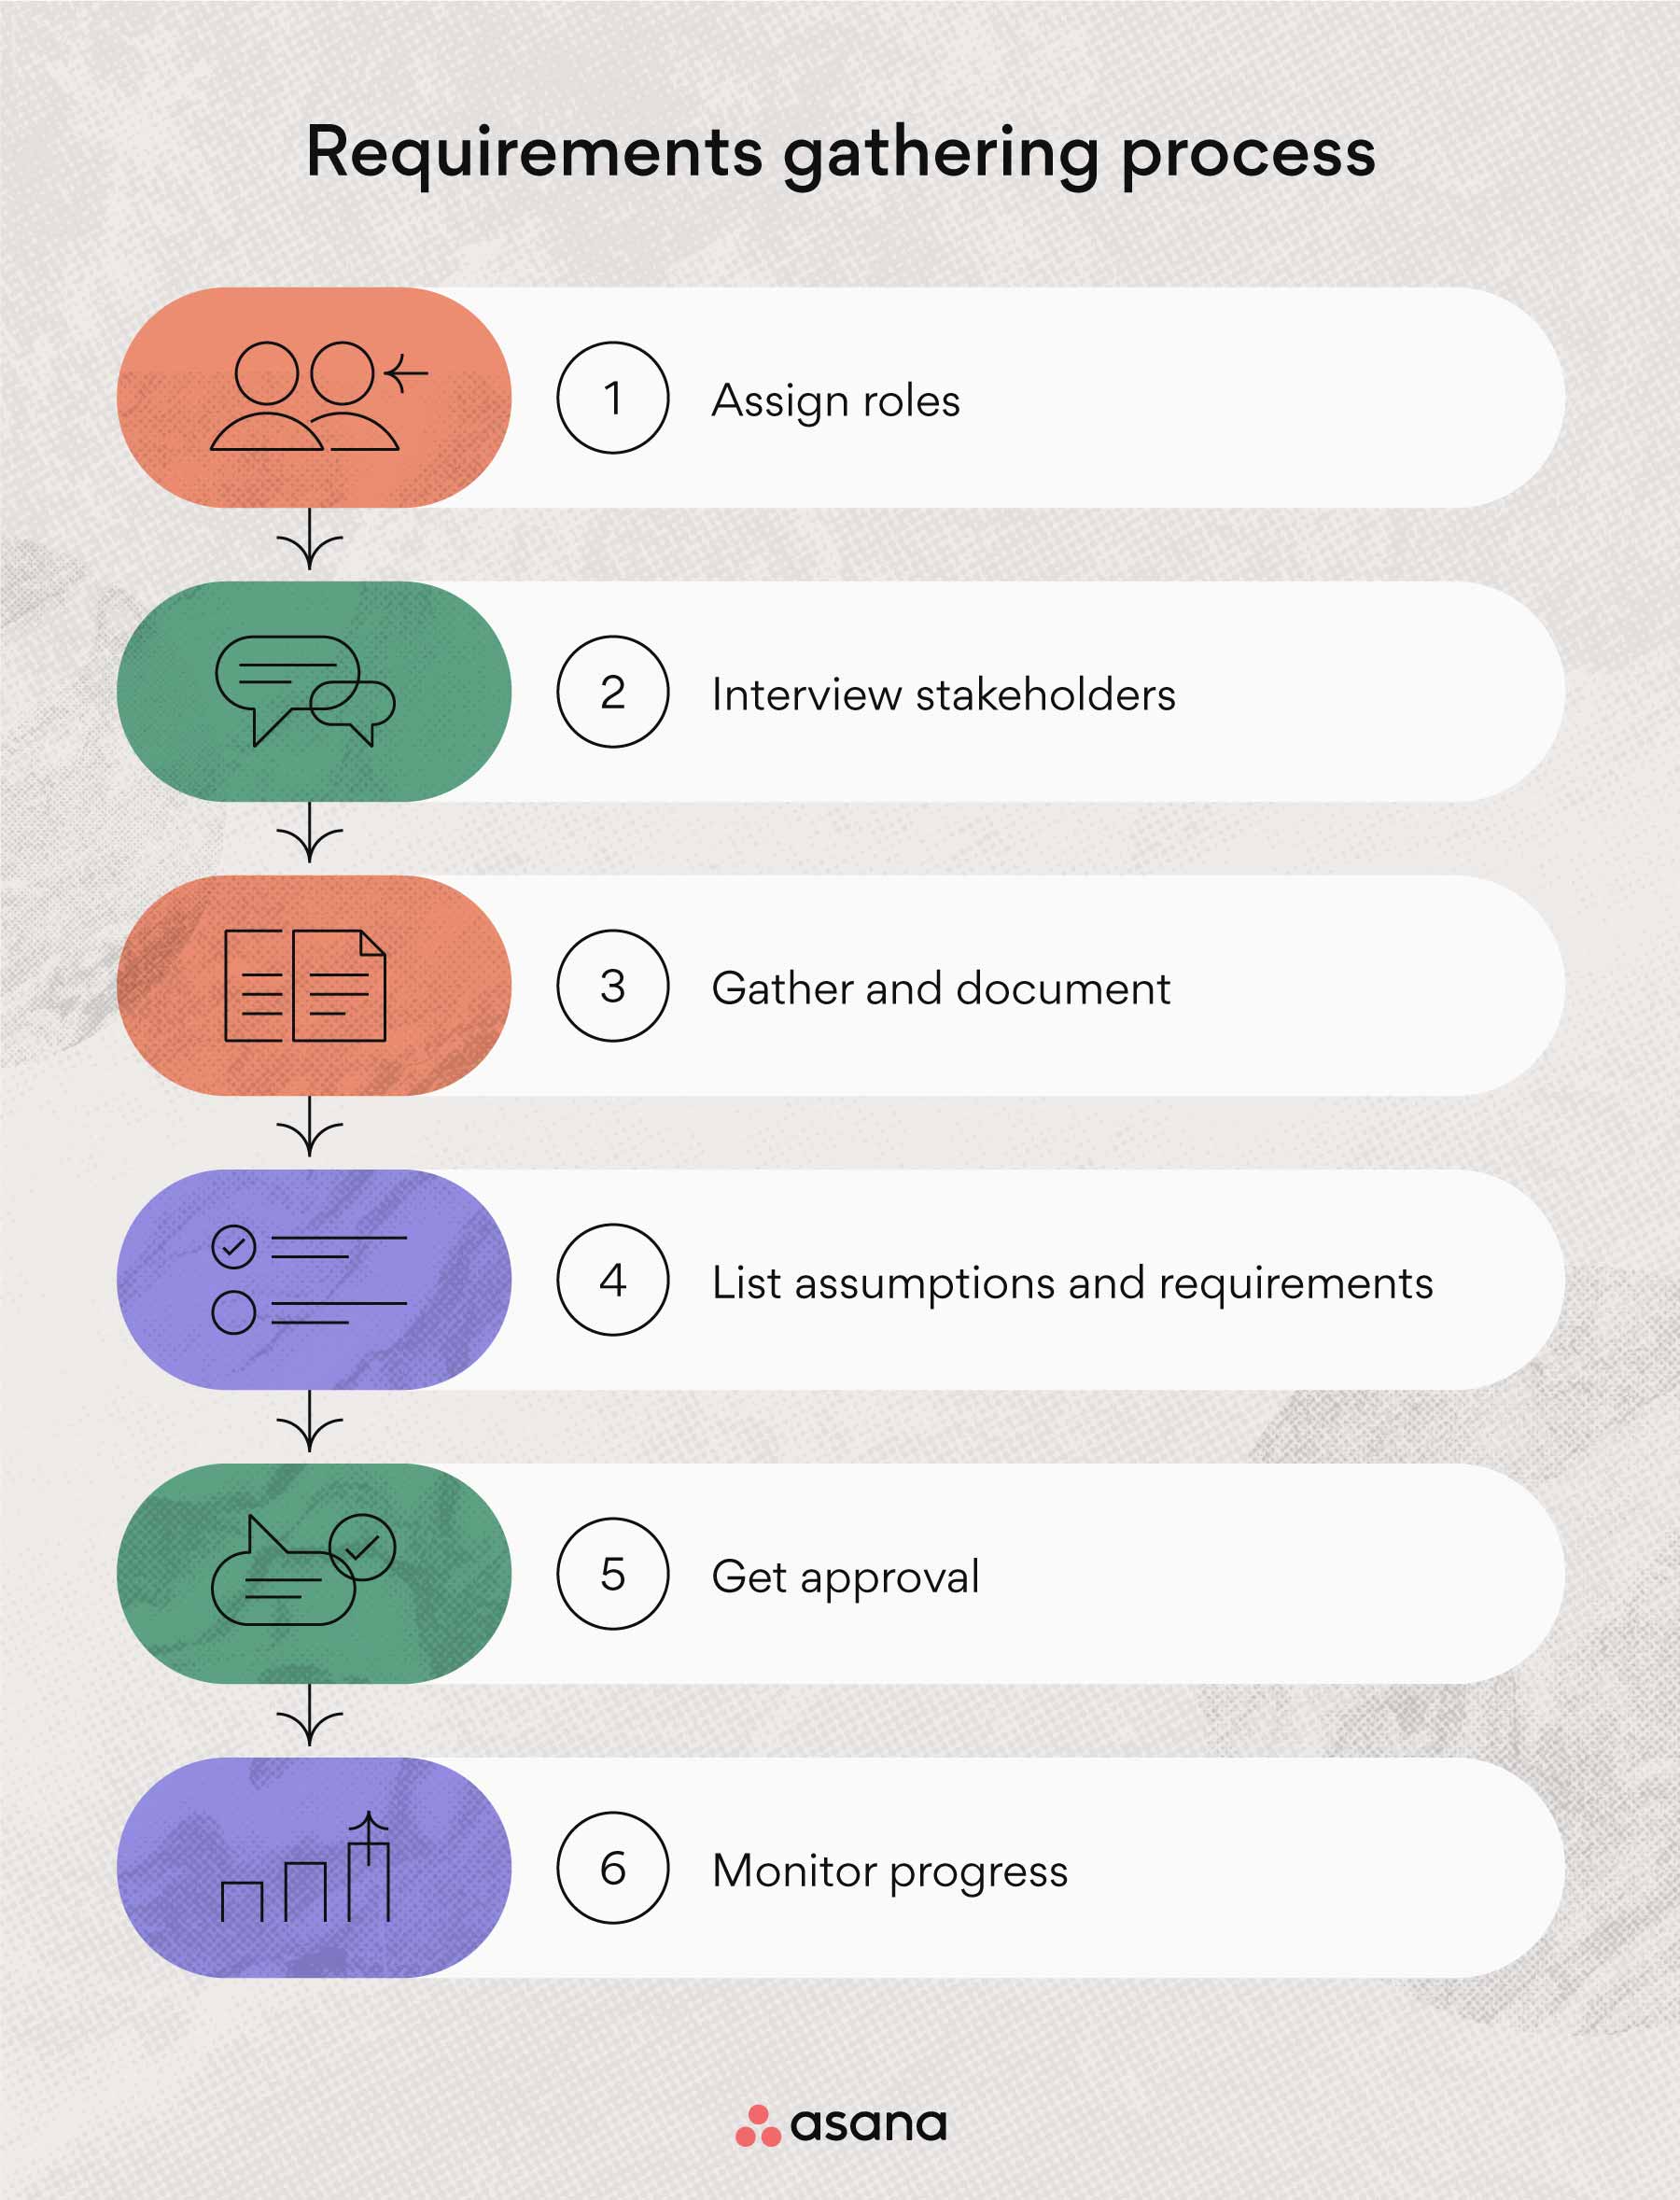 The 6-step requirements gathering process